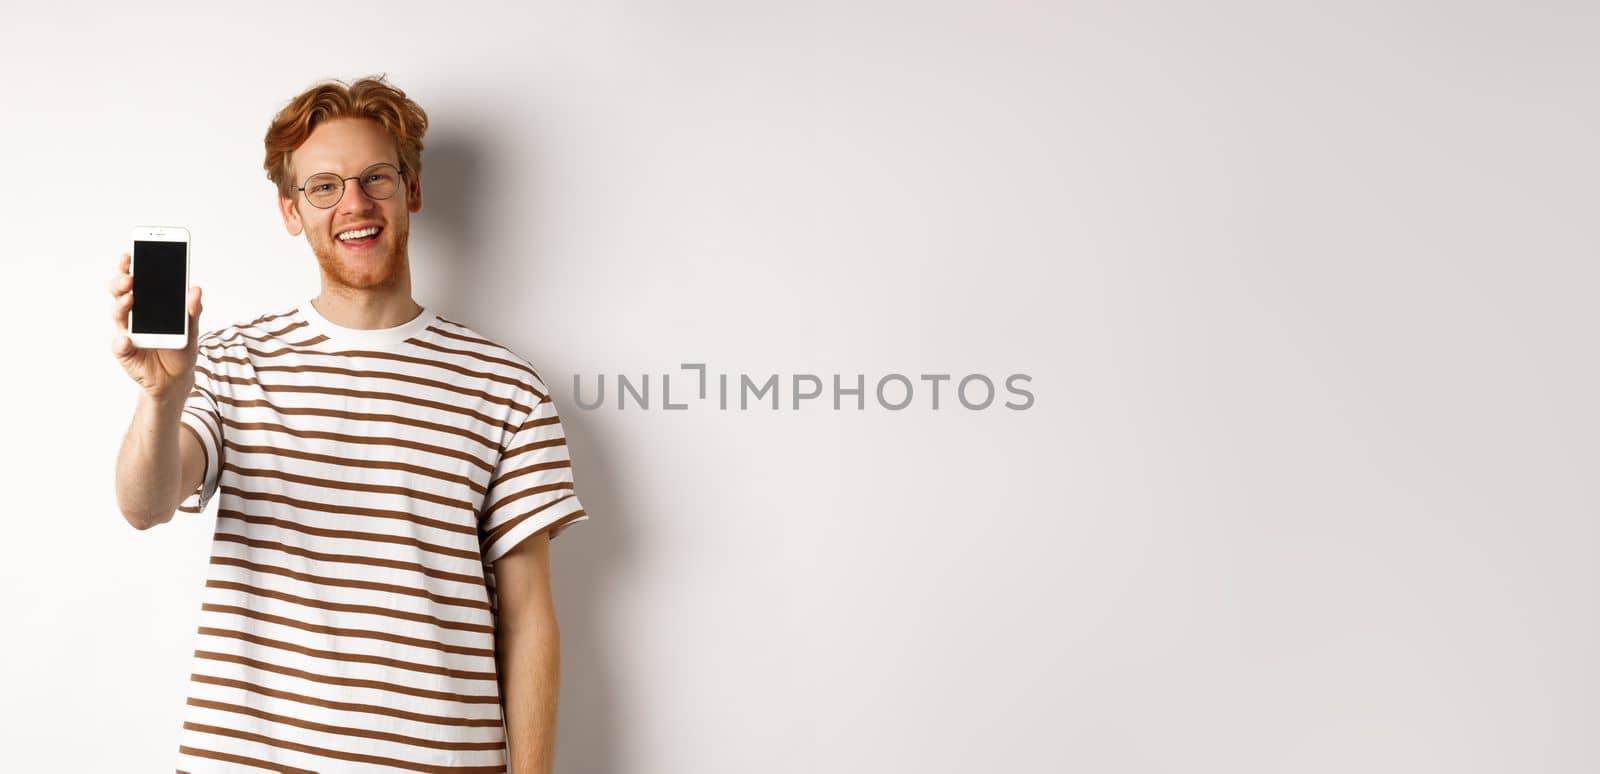 Technology and e-commerce concept. Happy young redhead man in glasses showing blank smartphone screen, smiling satisfied, standing over white background.